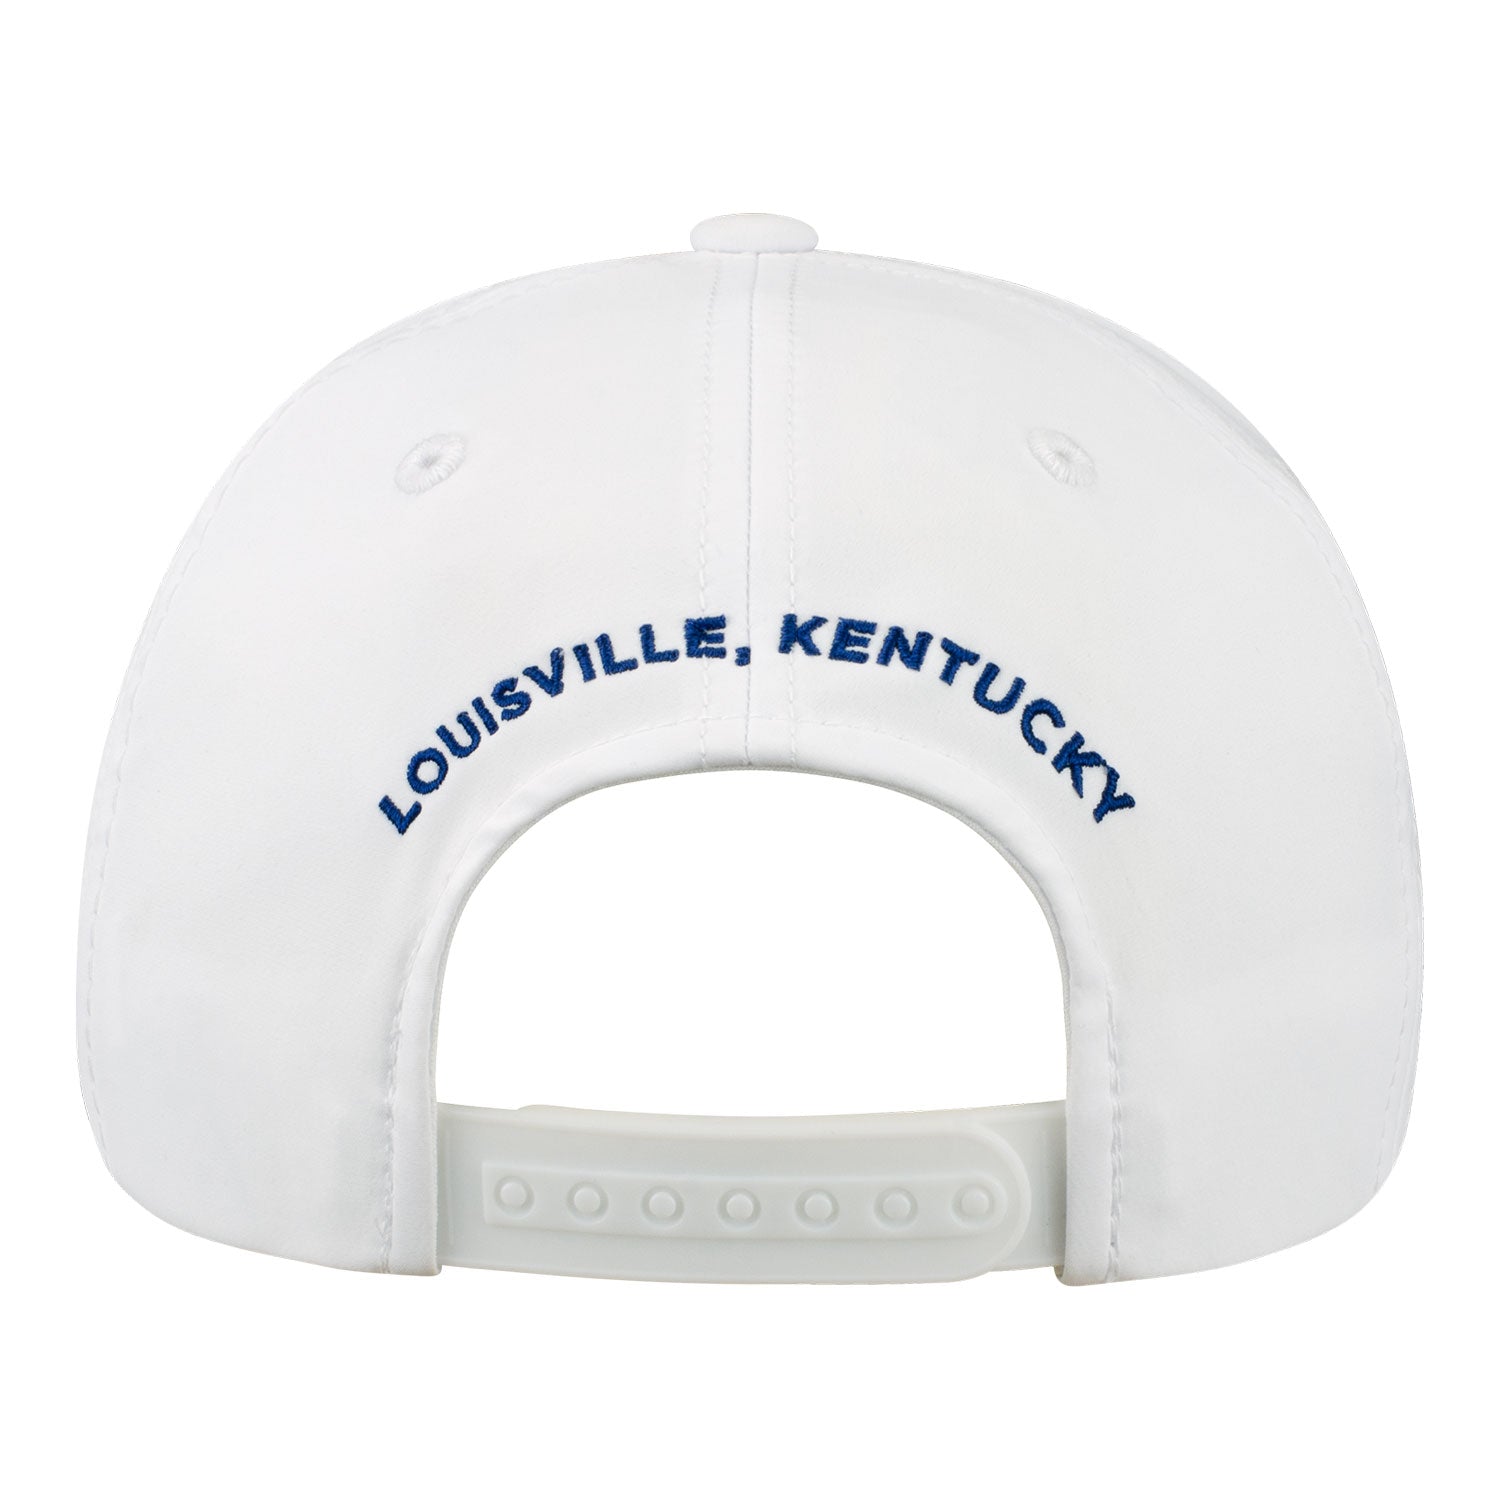 Ahead 2024 PGA Championship Airflow Perforated Hat in White - Angled Front Left View